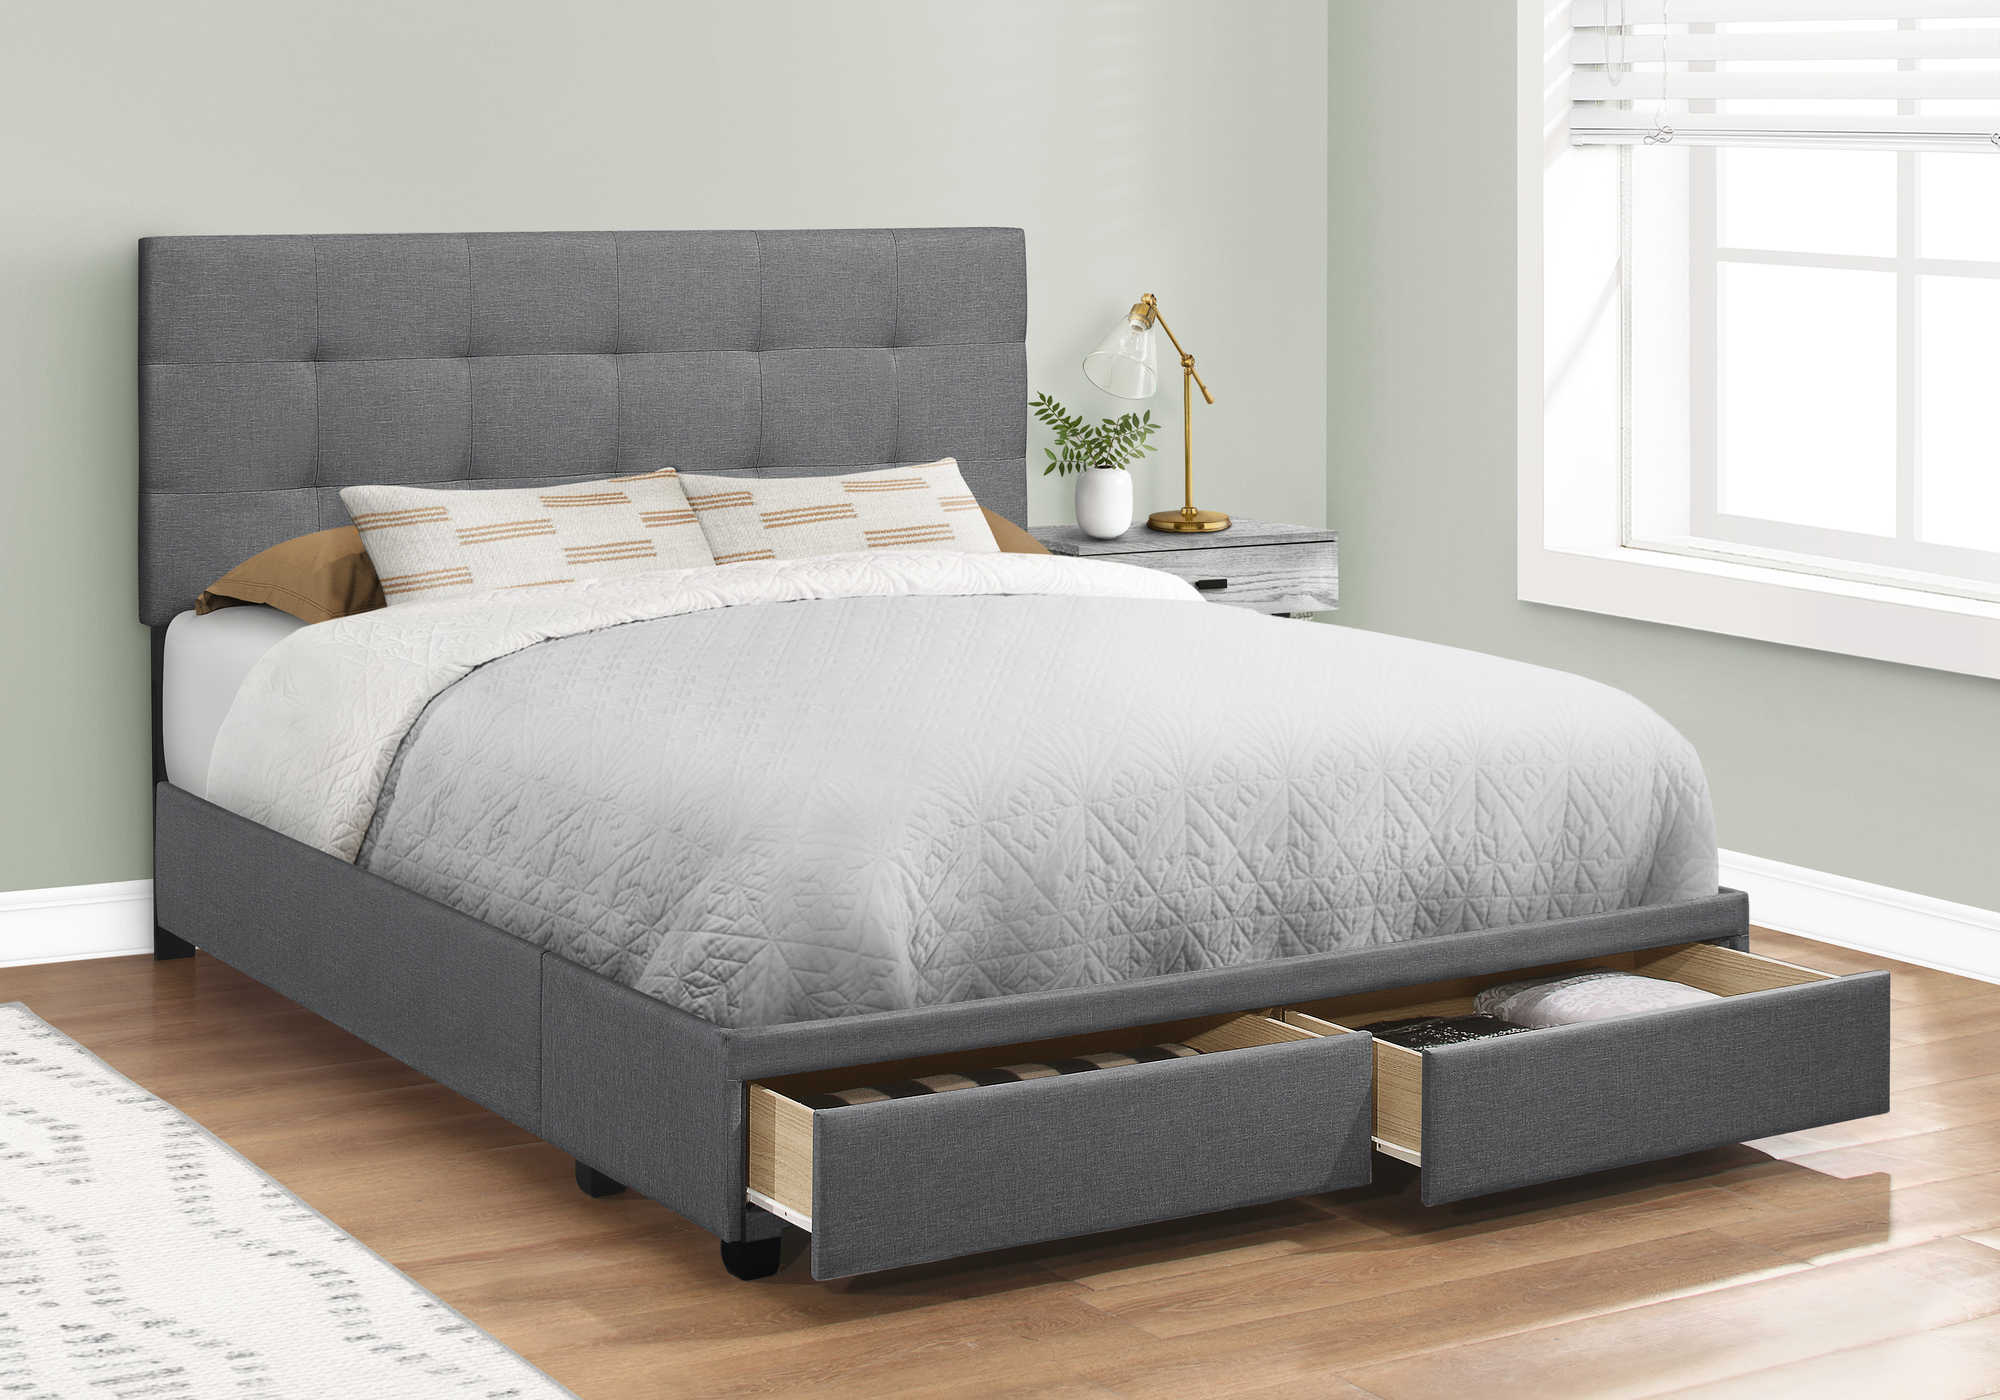 I 6022Q - BED - QUEEN SIZE / DARK GREY LINEN WITH 2 STORAGE DRAWERS BY MONARCH SPECIALTIES INC